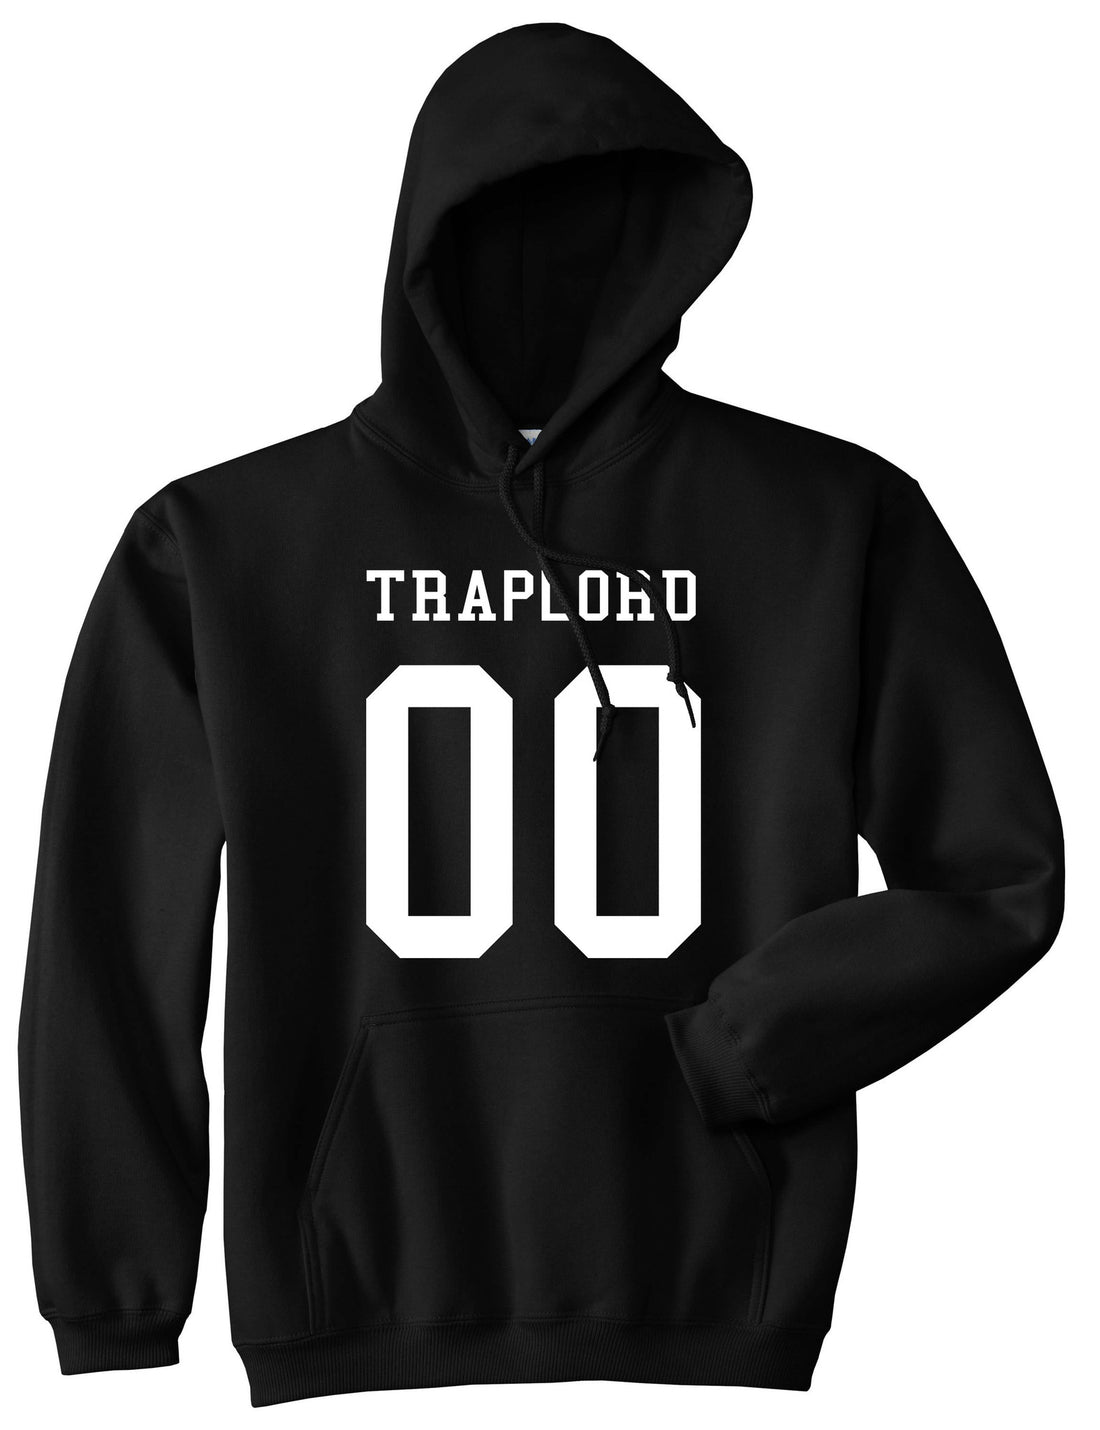 Traplord Team Jersey 00 Trap Lord Boys Kids Pullover Hoodie Hoody in Black By Kings Of NY